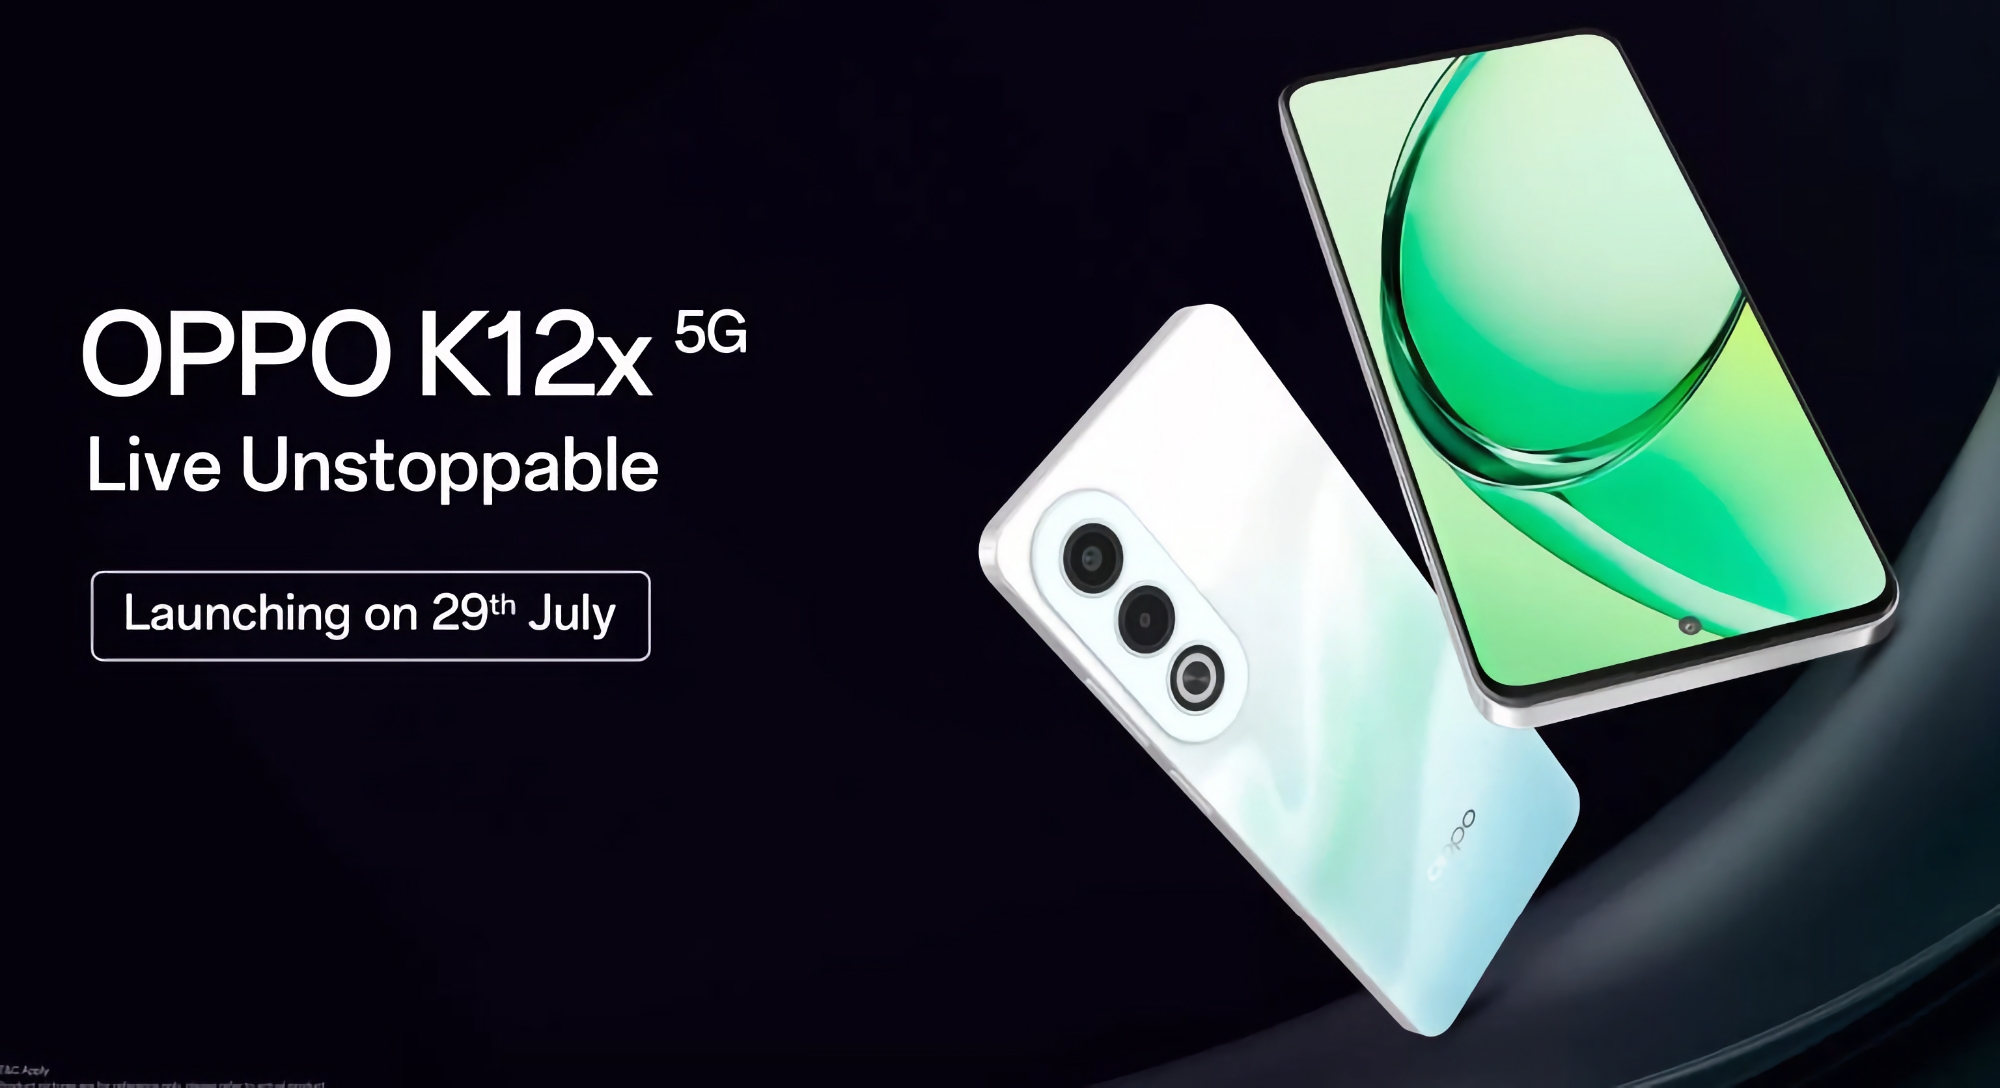 OPPO K12x 5G with MIL-STD-810H and IP54 protection will make its global debut on 29 July